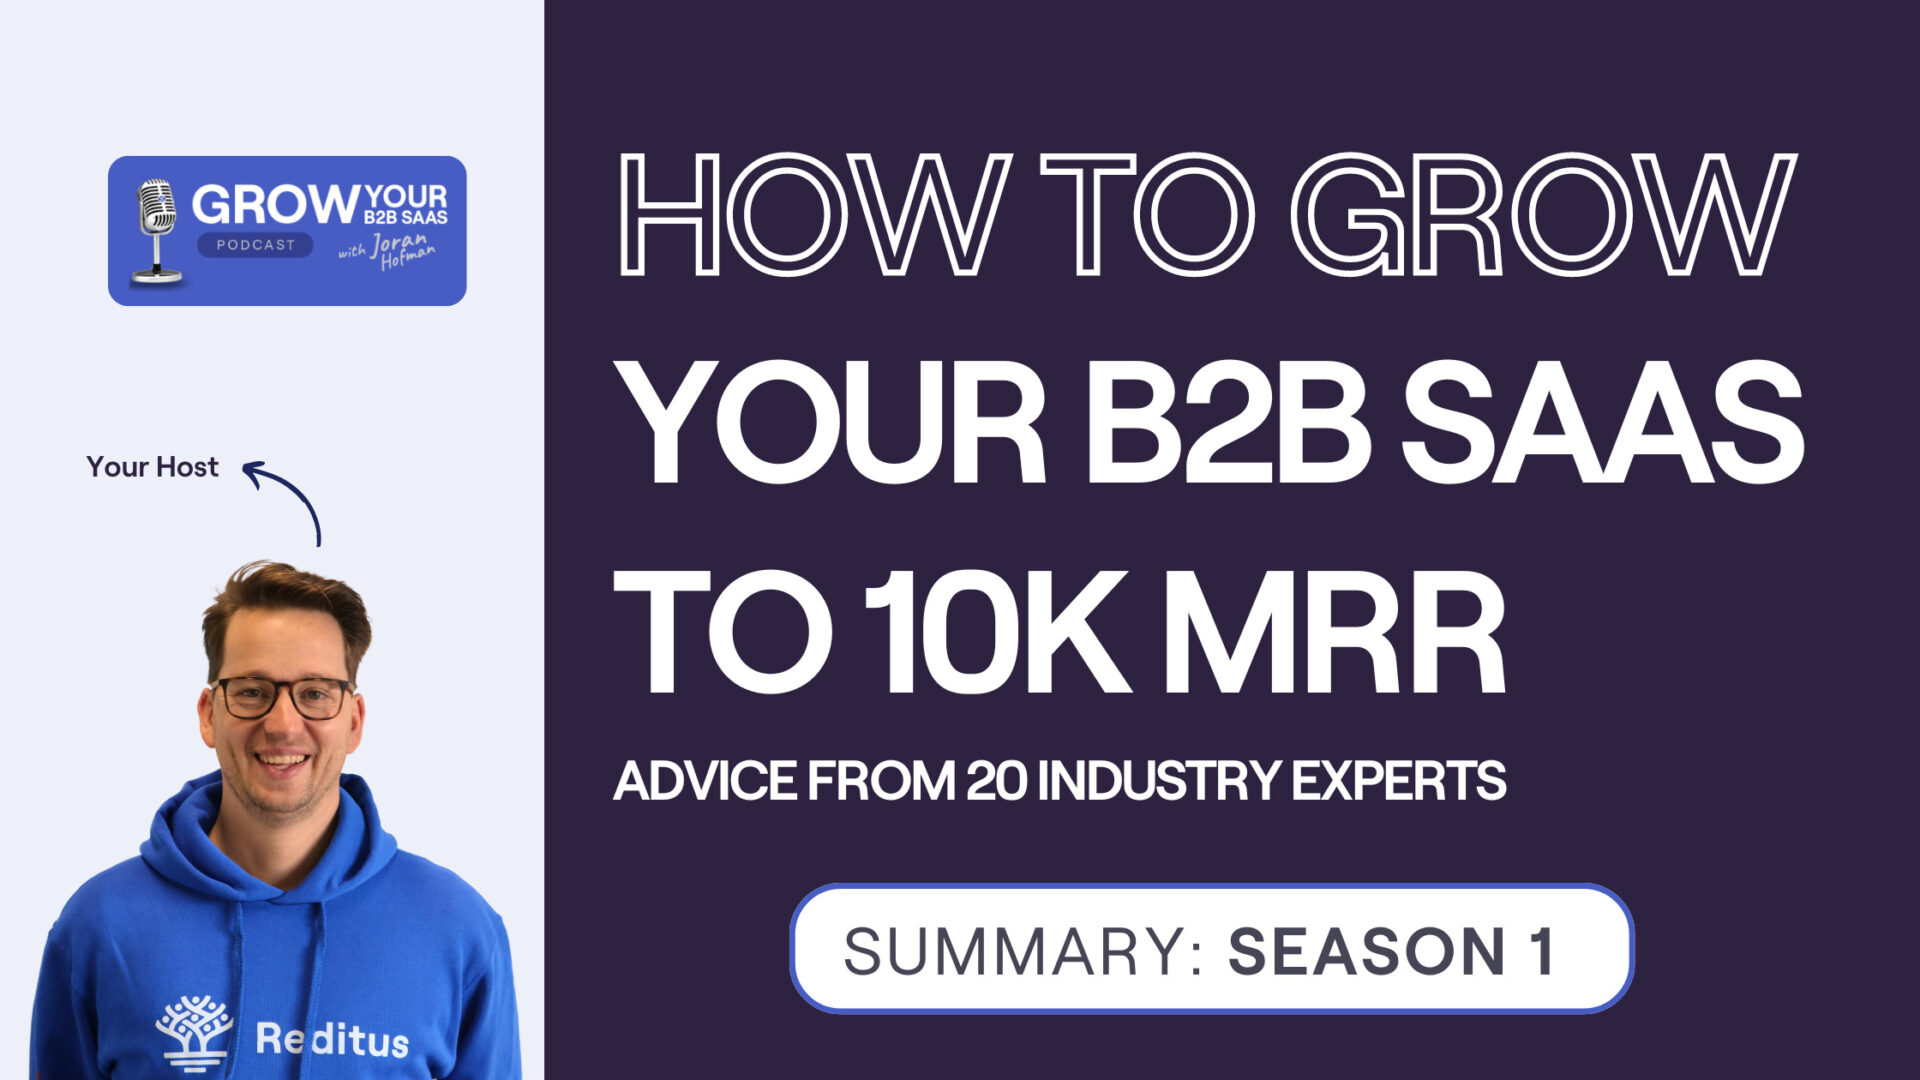 https://www.getreditus.com/podcast/s1e21-how-to-grow-your-b2b-saas-to-10k-monthly-recurring-revenue10k-mrr/